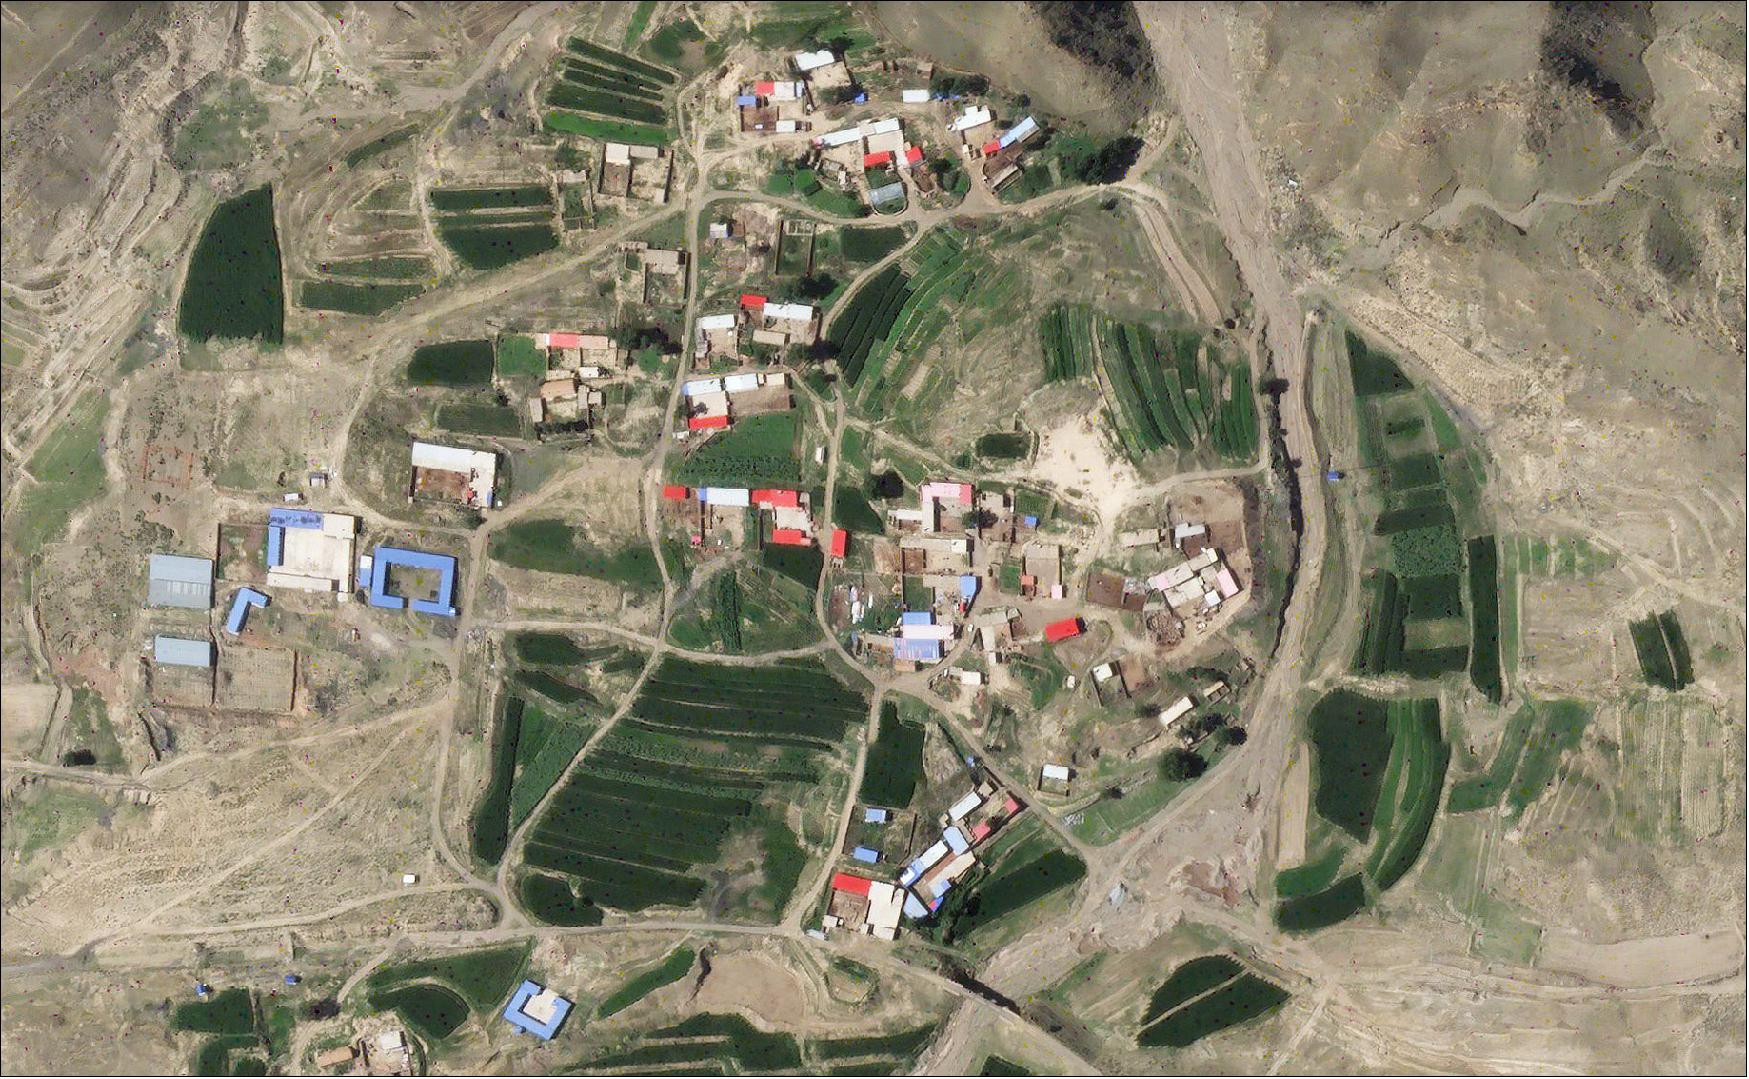 Figure 14: SkySat 18 saw the village of Xiguanjing, China and the hills of Inner Mongolia when it first observed Earth on July 18, 2020 (image credit: © 2020, Planet Labs Inc)